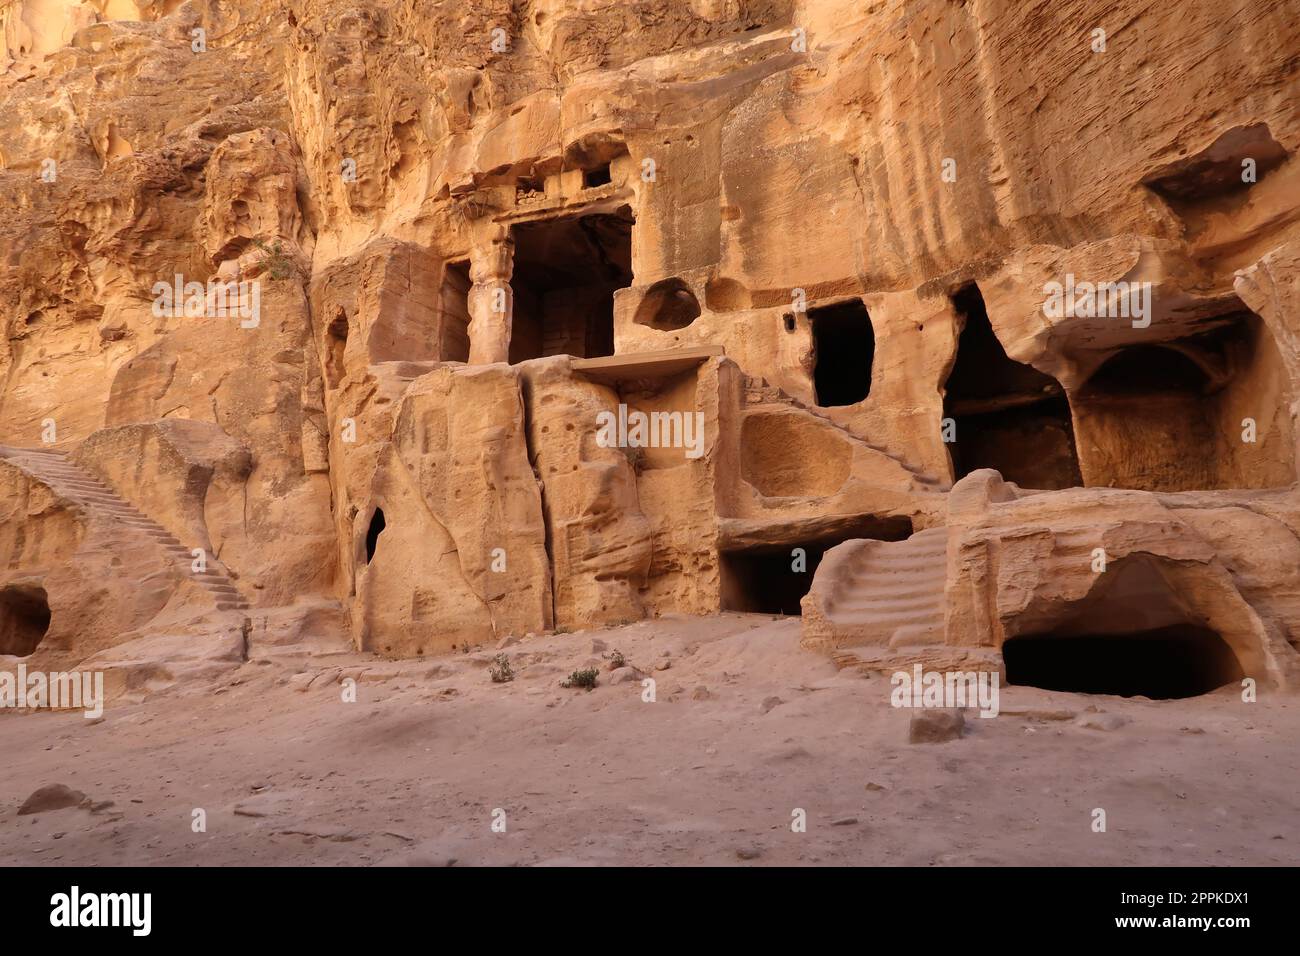 Two-storey rock structure in which the biclinium and Nabataean wall paintings can be found, Little Petra/Siq al-Barid, Jordan Stock Photo